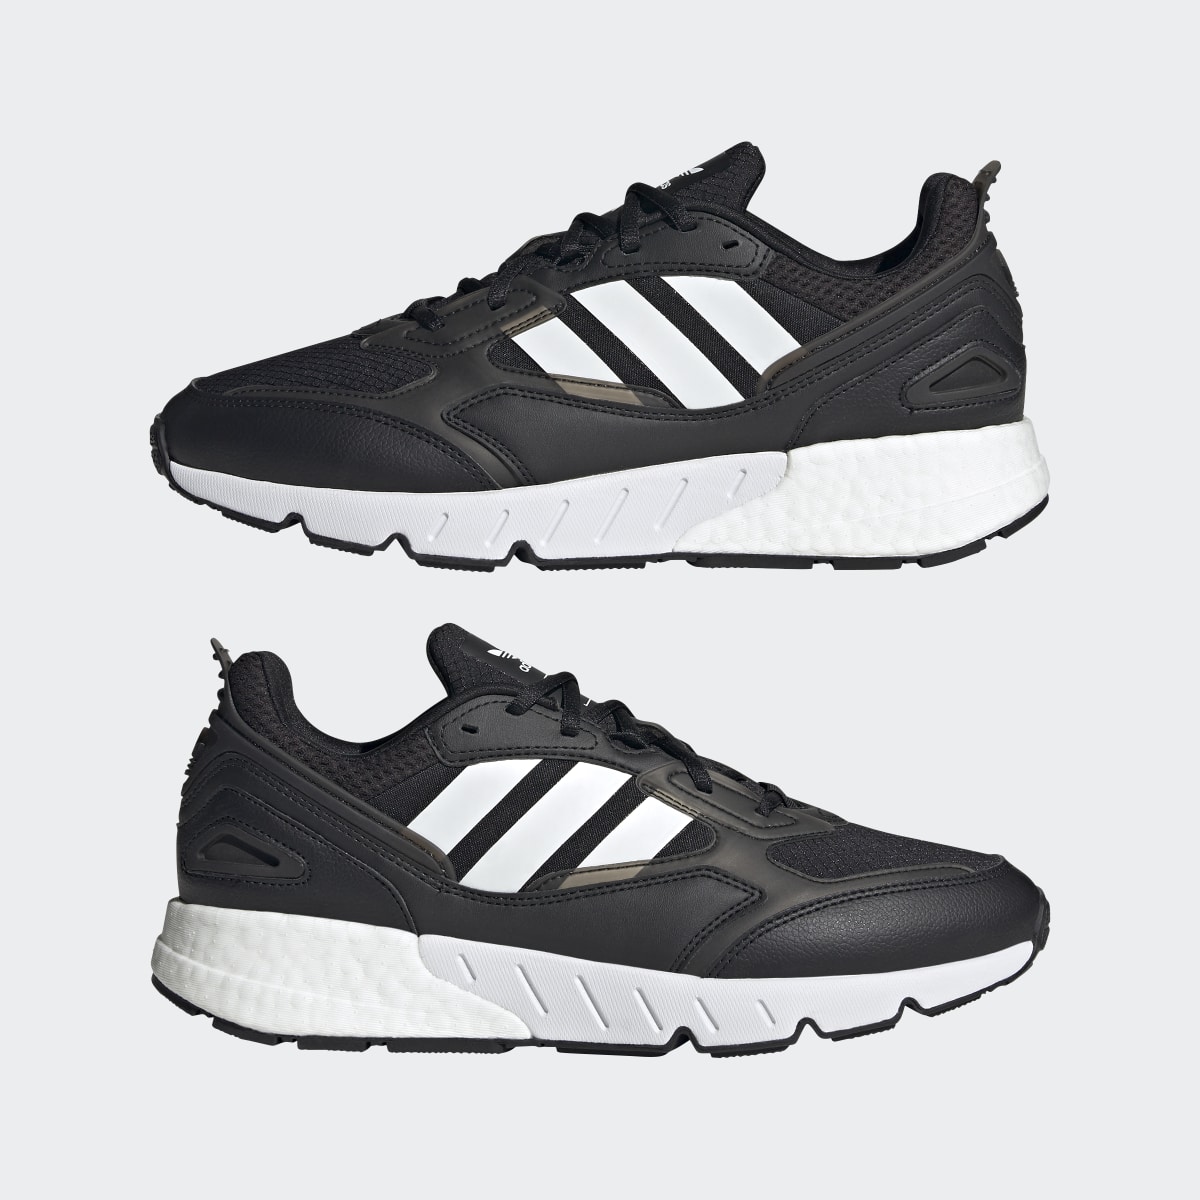 Adidas ZX 1K Boost 2.0 Shoes. 8